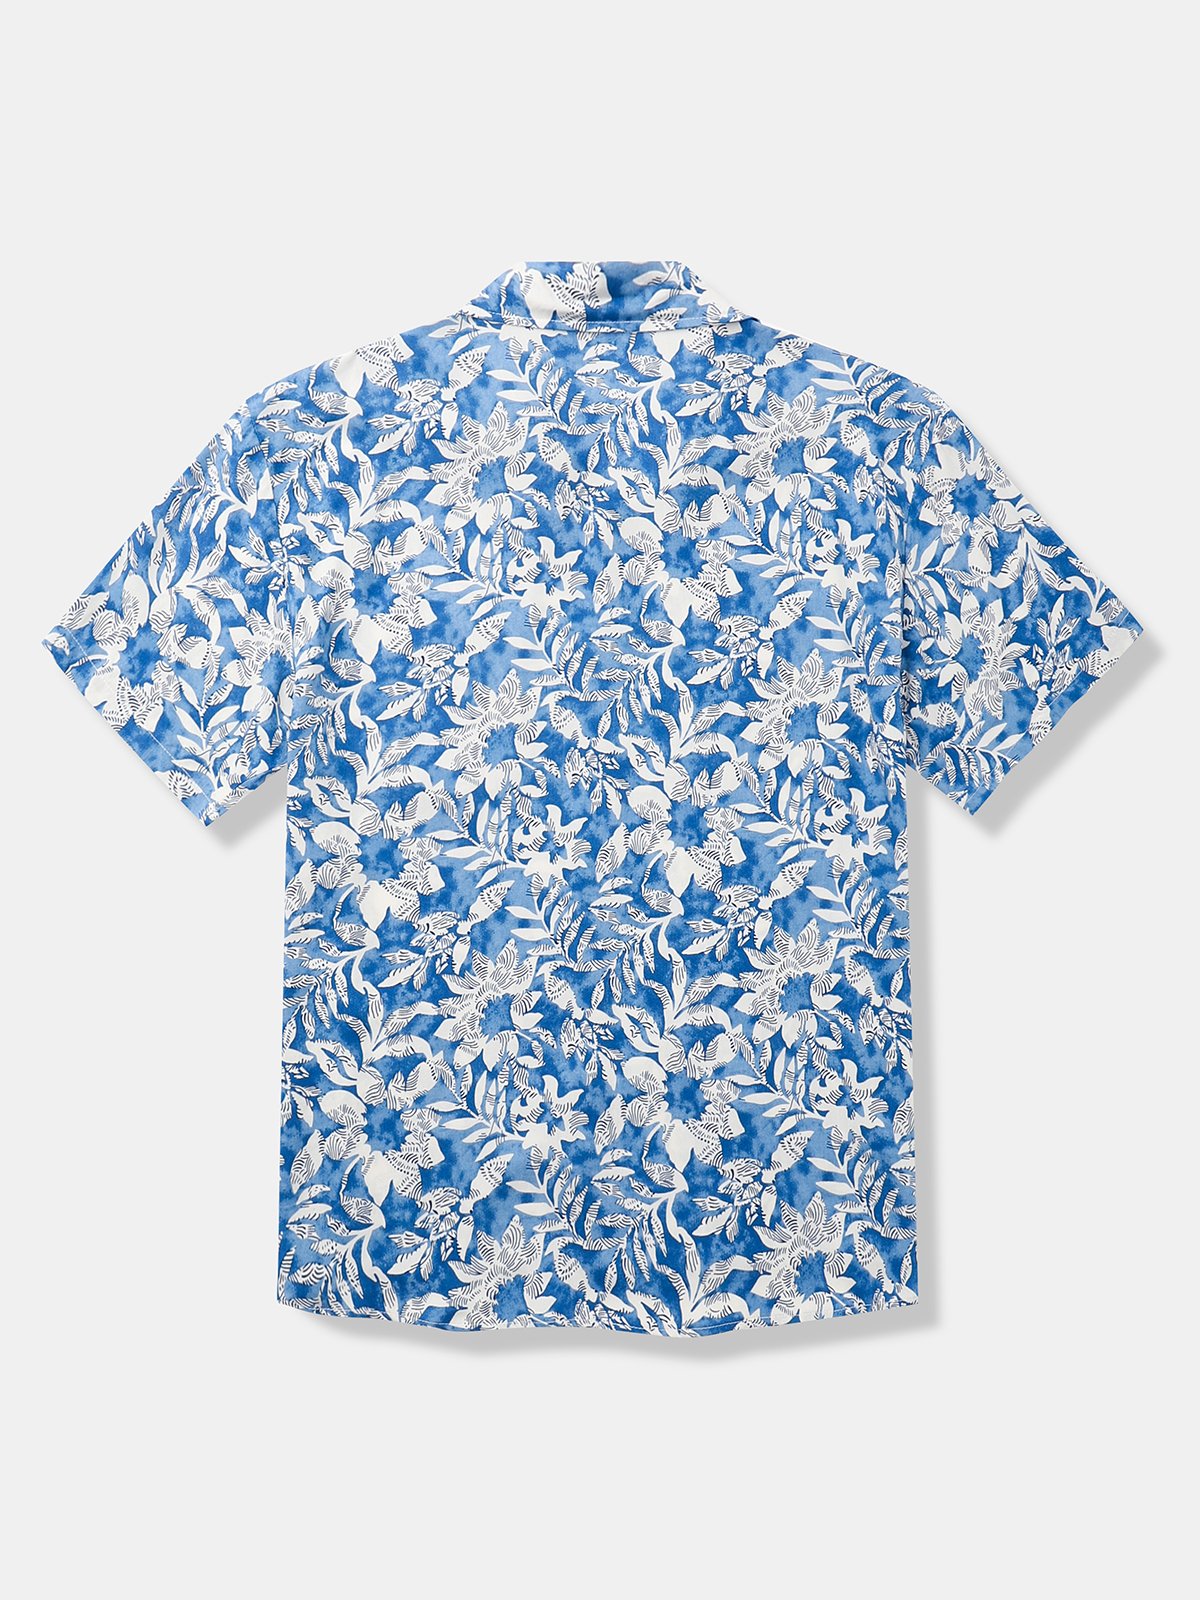 Hardaddy Tropical Floral Chest Pocket Short Sleeve Casual Shirt